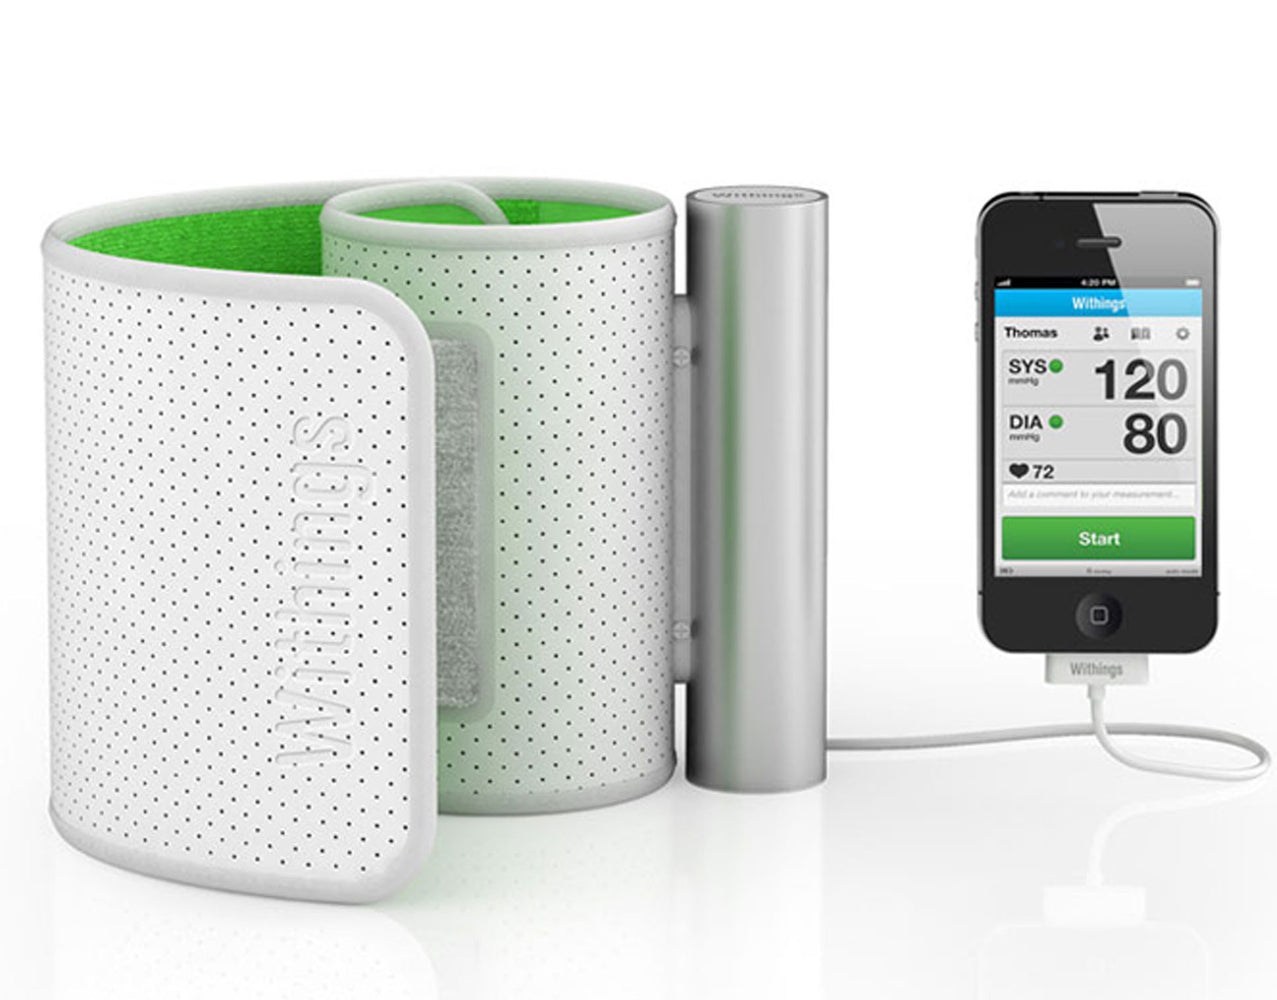 Withings Blood Pressure Monitor for iPhone, iPad and iPod touch